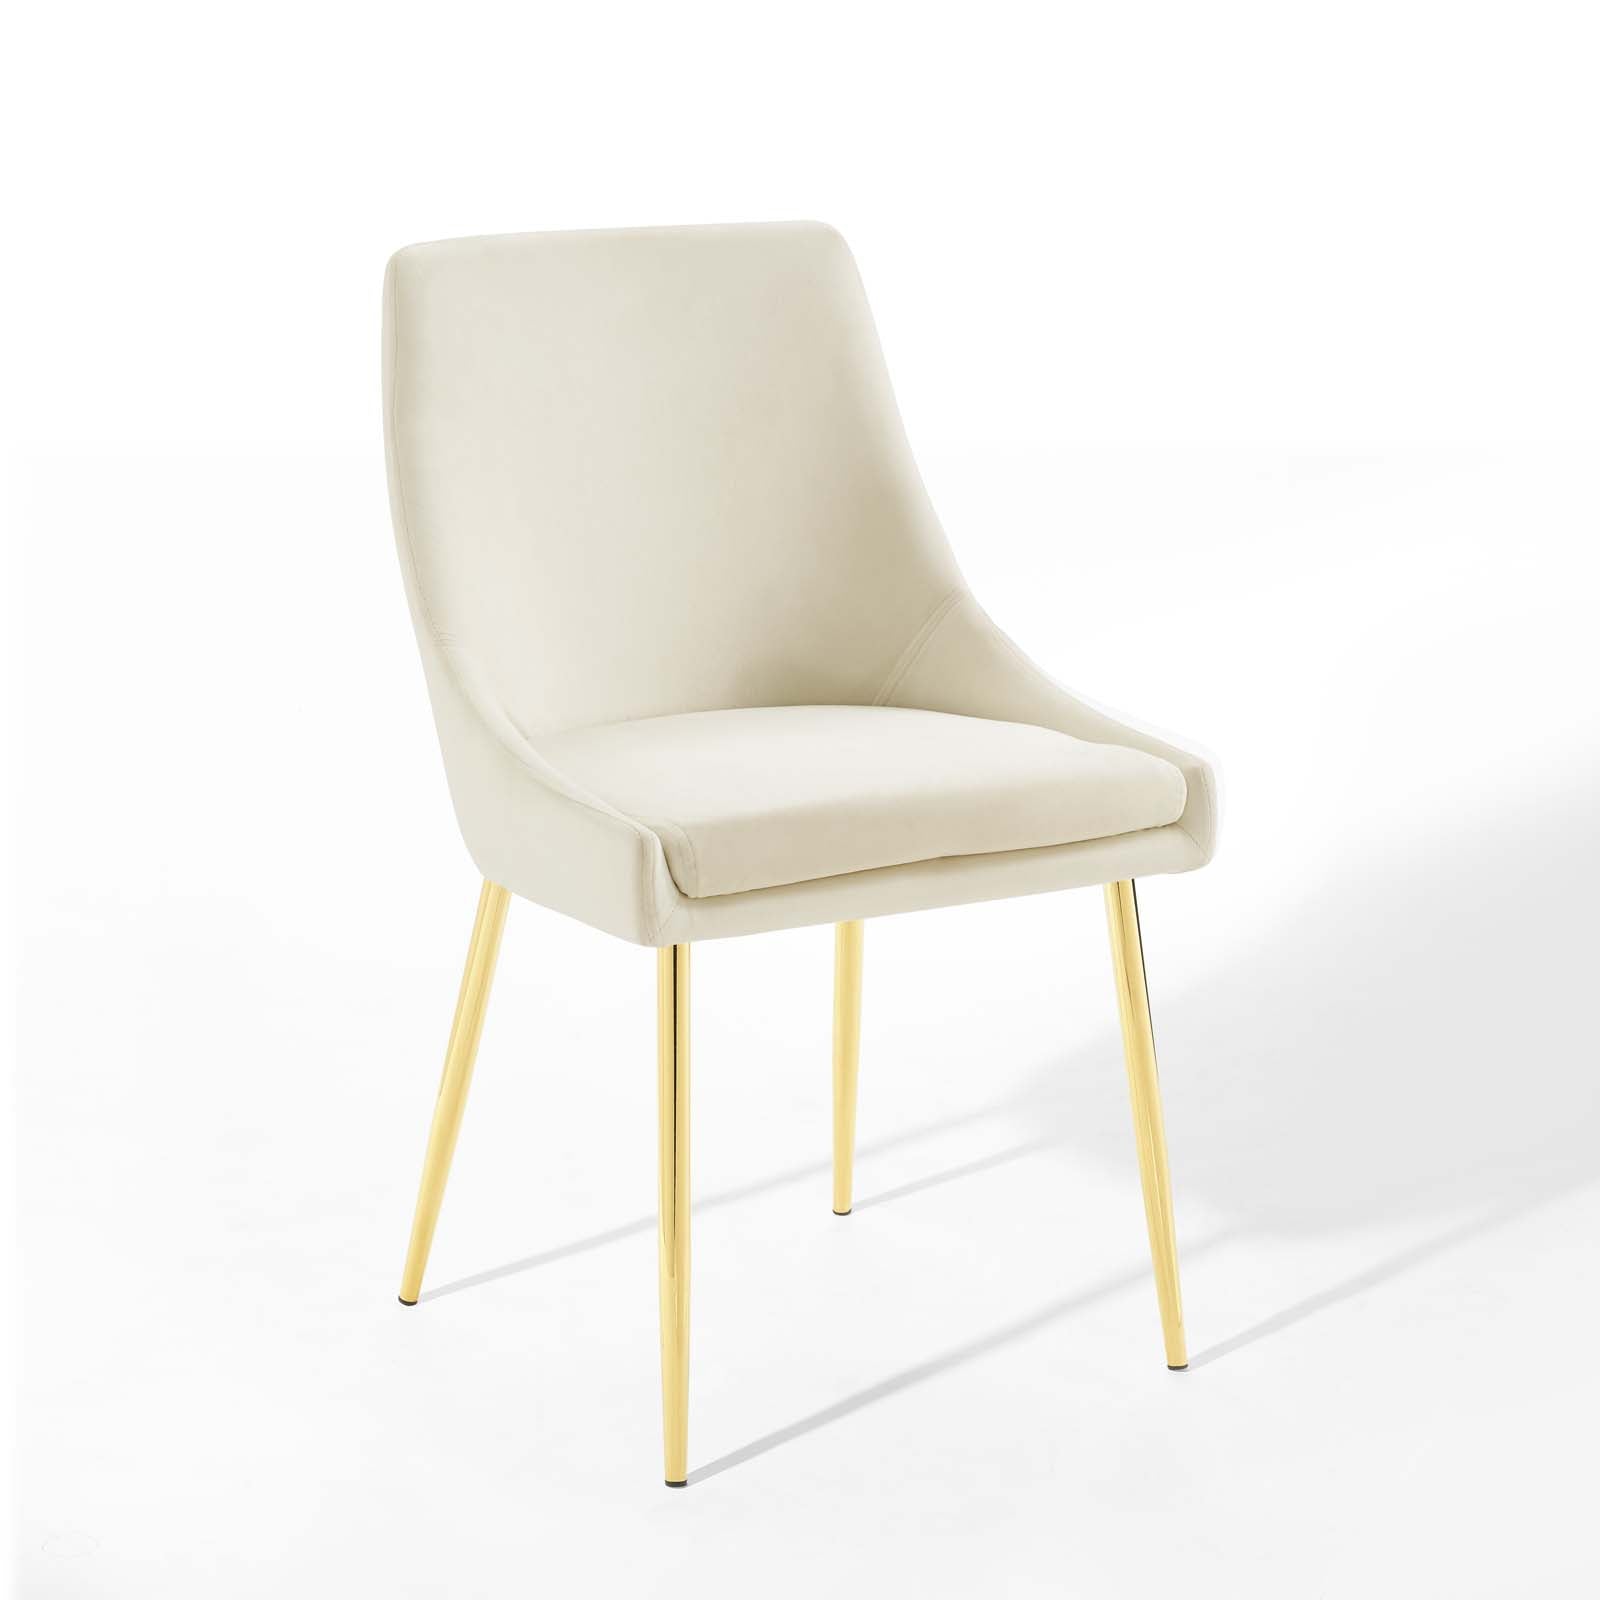 Viscount Performance Velvet Dining Chairs - Set of 2 Gold Ivory